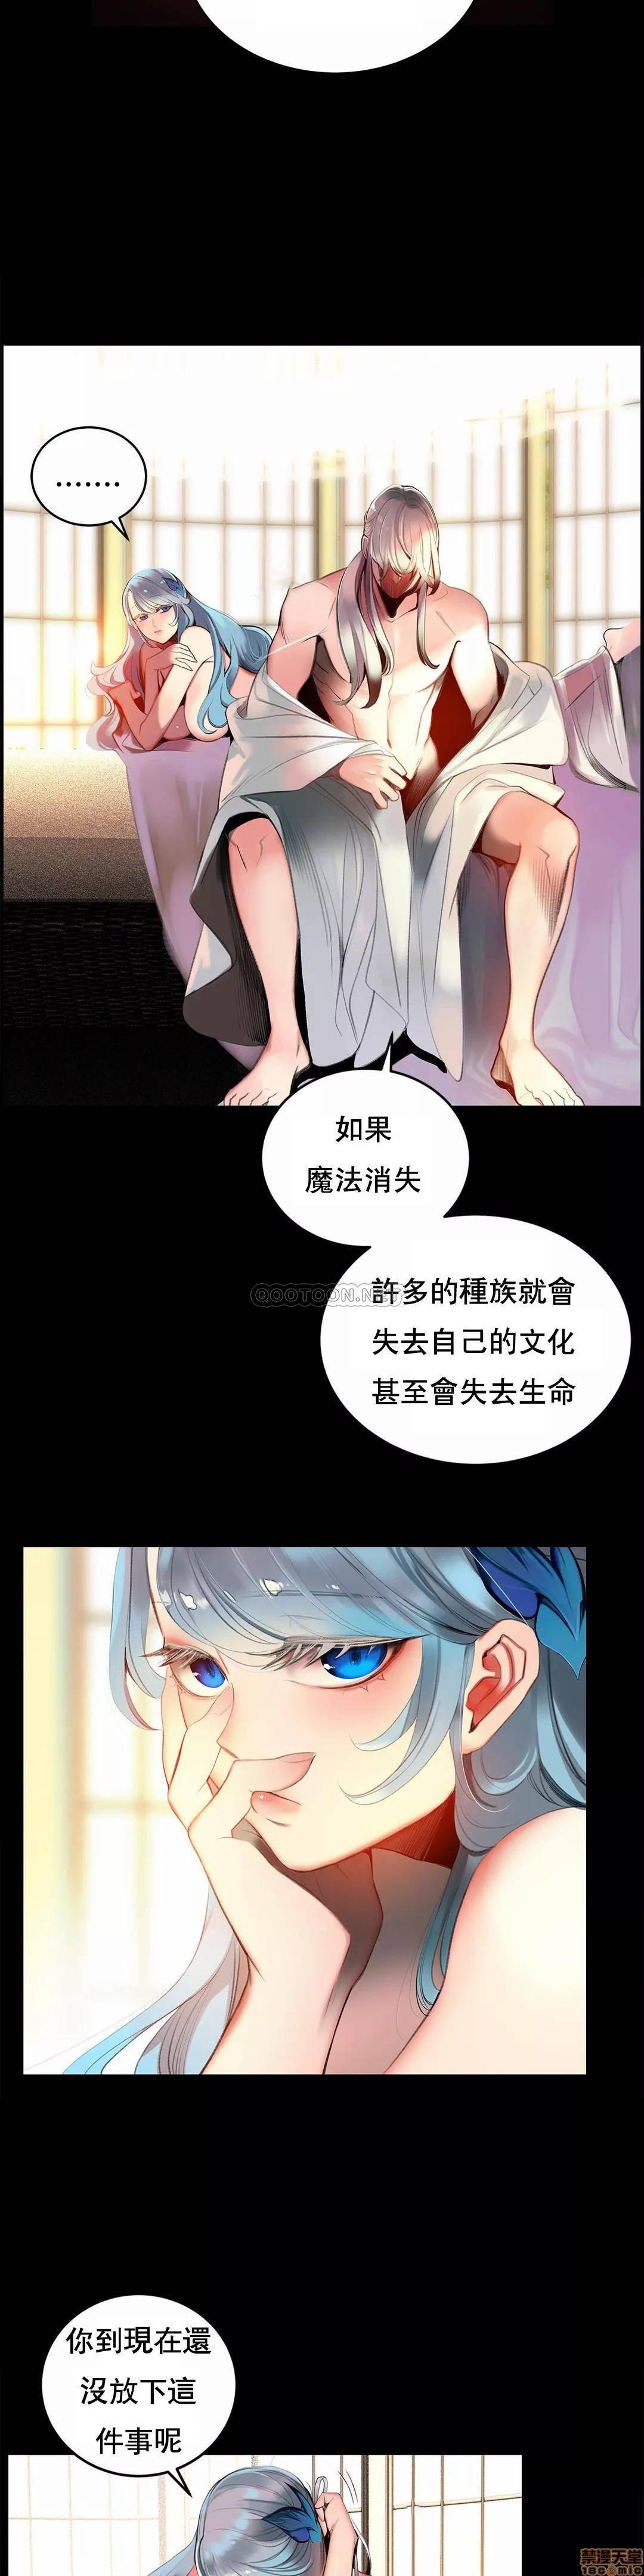 [Juder] Lilith`s Cord (第二季) Ch.77-93 end [Chinese] 94